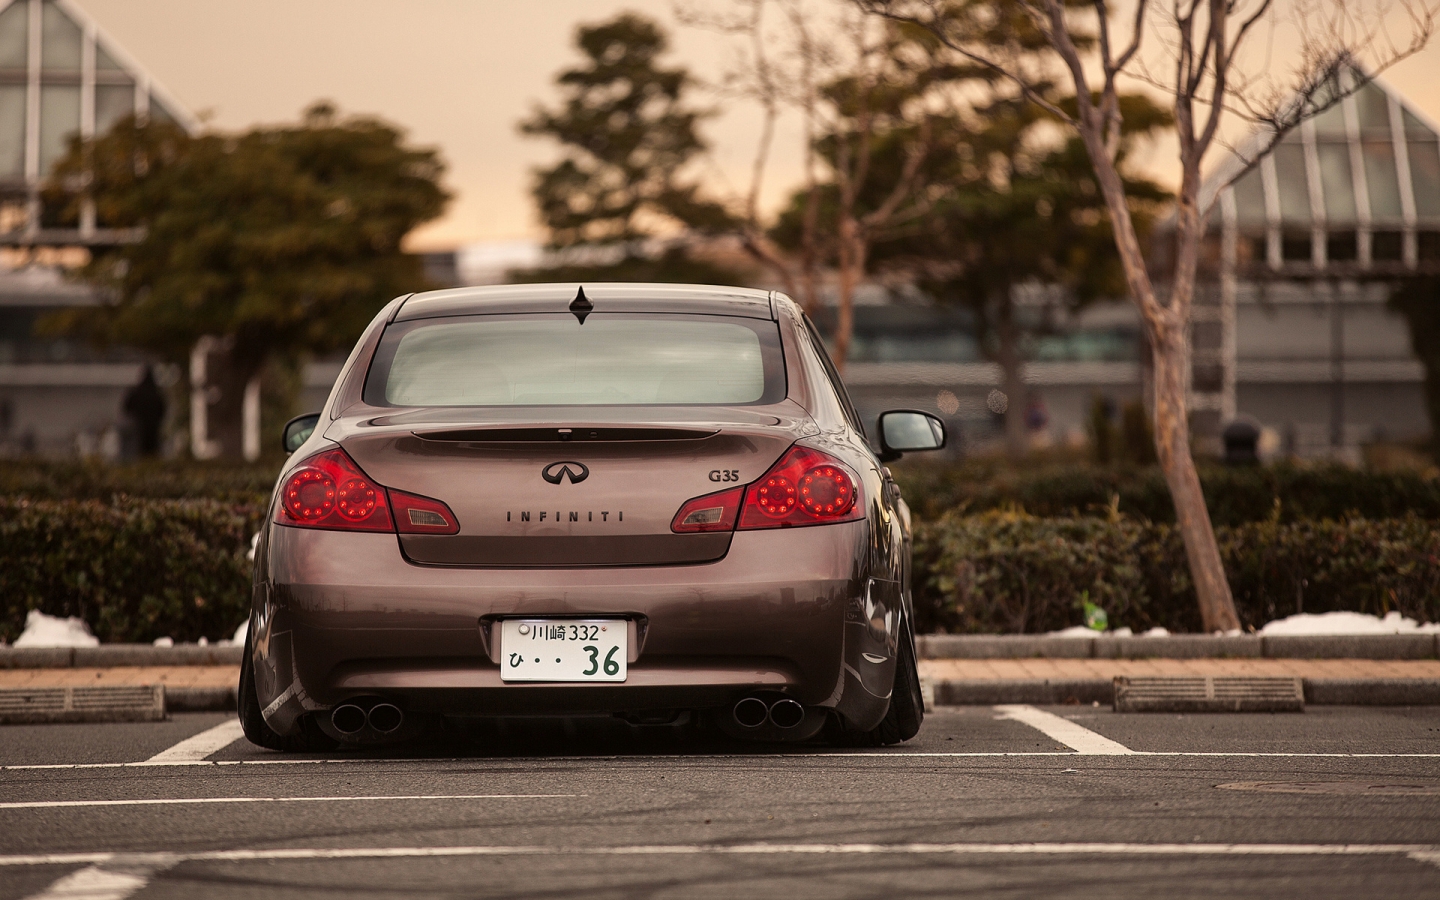 Tuned G35 Infiniti for 1440 x 900 widescreen resolution